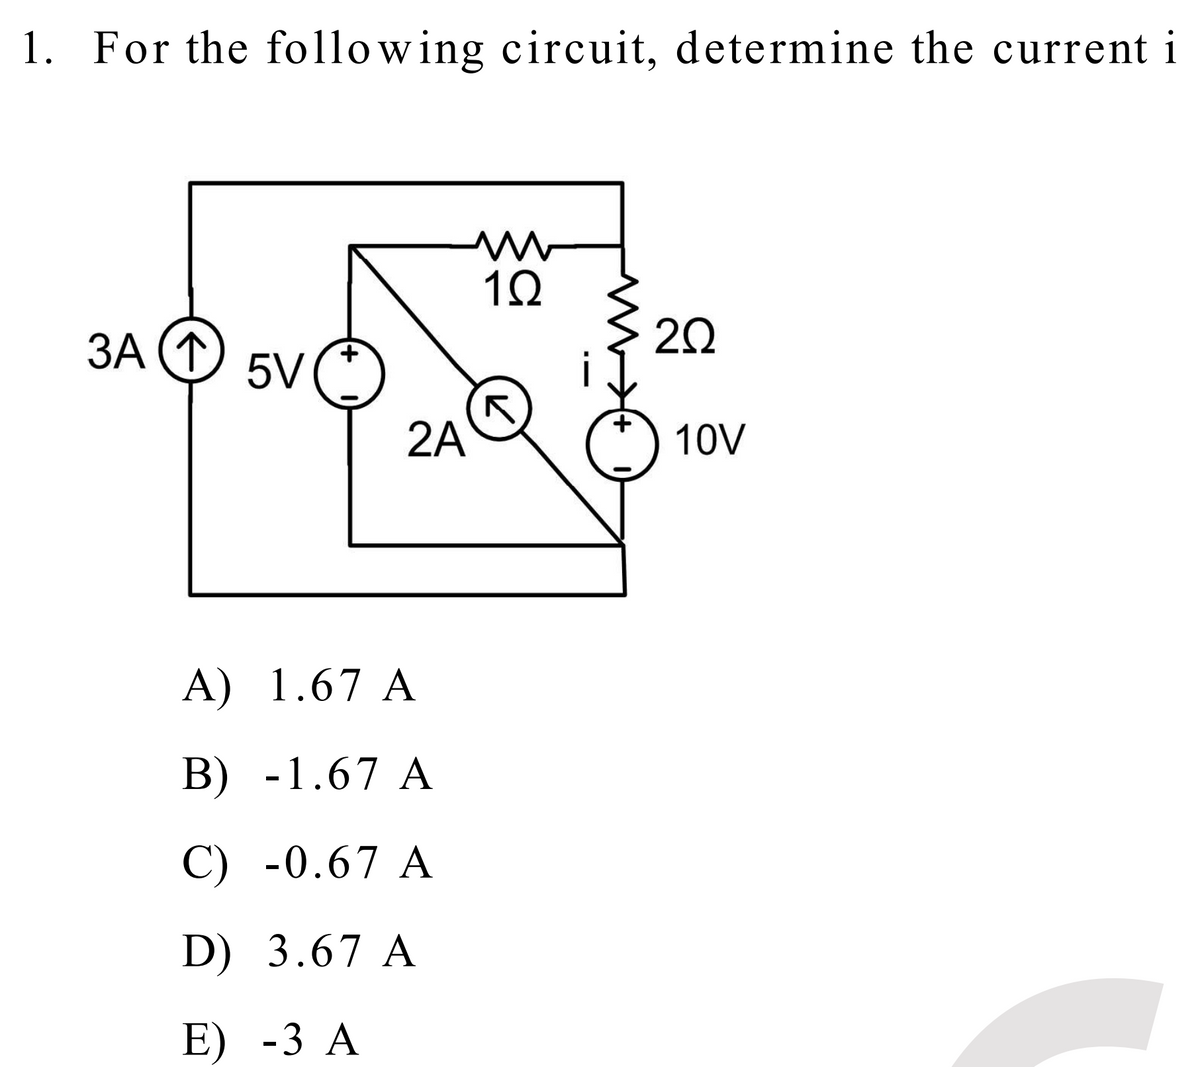 1. For the following circuit, determine the current i
3A (↑)
5V(
2A
A)
1.67 A
B) -1.67 A
C) -0.67 A
D) 3.67 A
E) -3 A
www
1Ω
202
10V